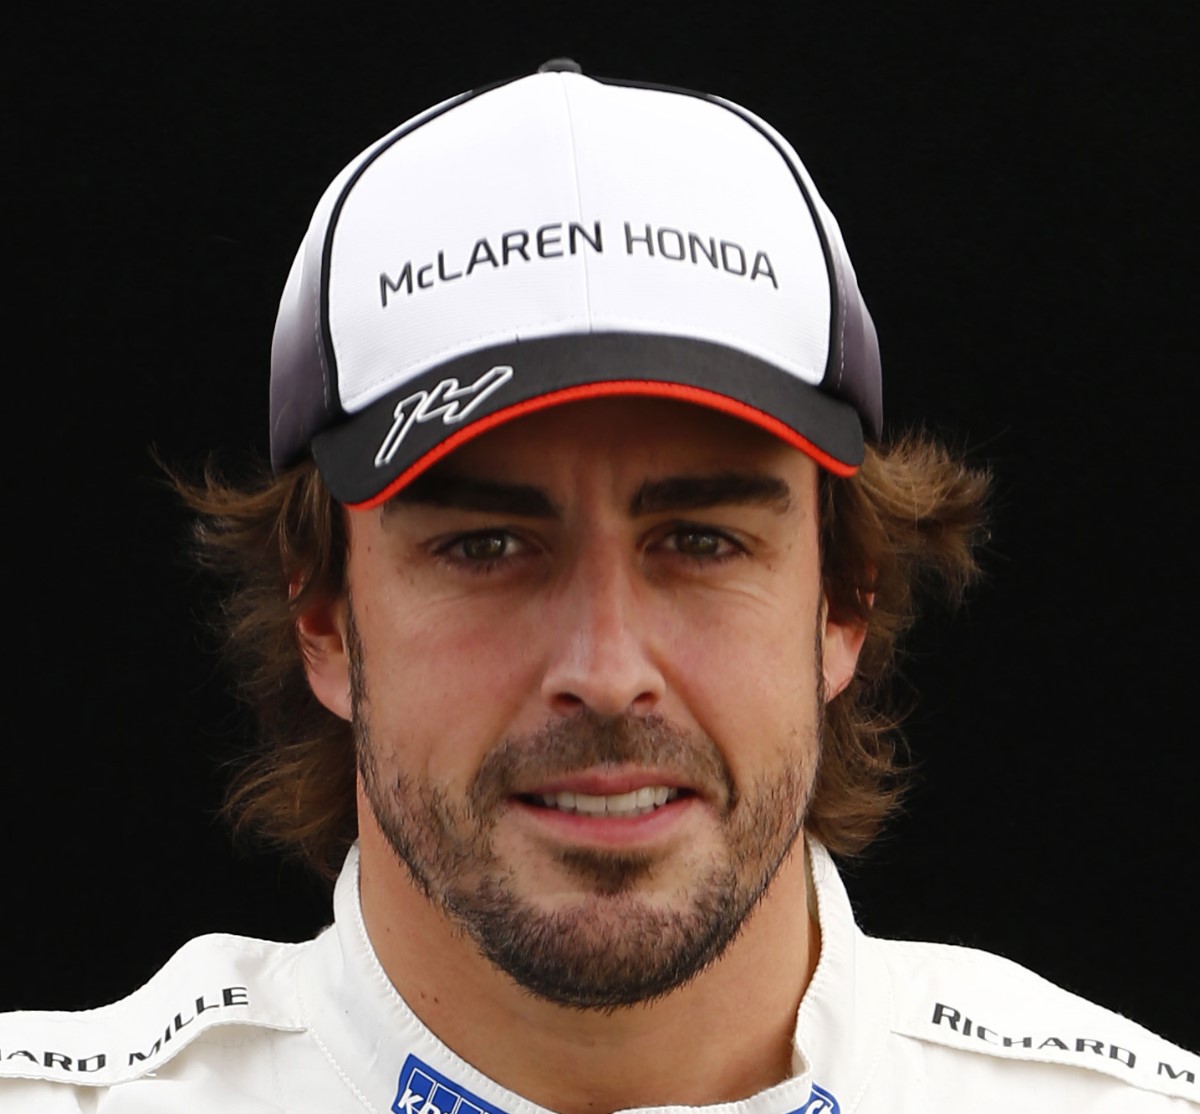 Alonso not fit to drive